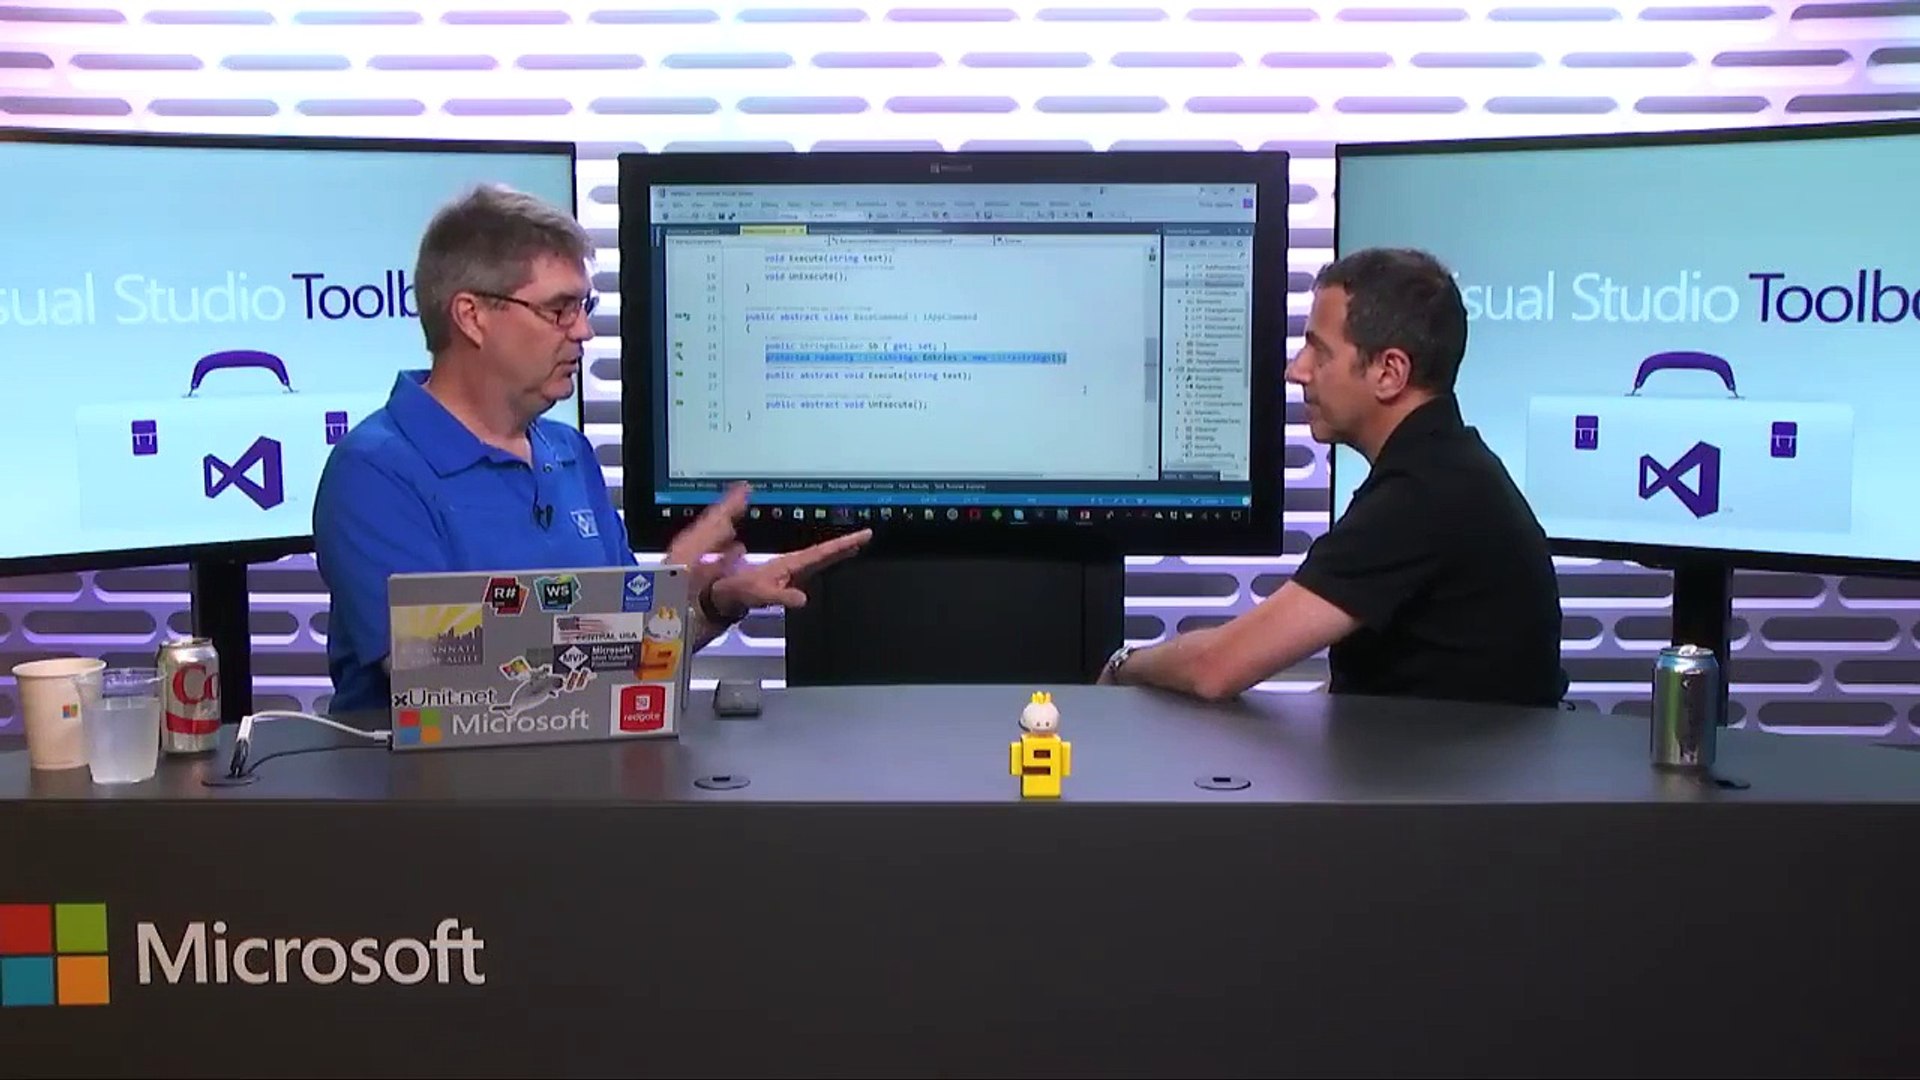 #1 Design Patterns in C# - Command Memento Behavioral Pattern with Robert Green and Phil Japikse